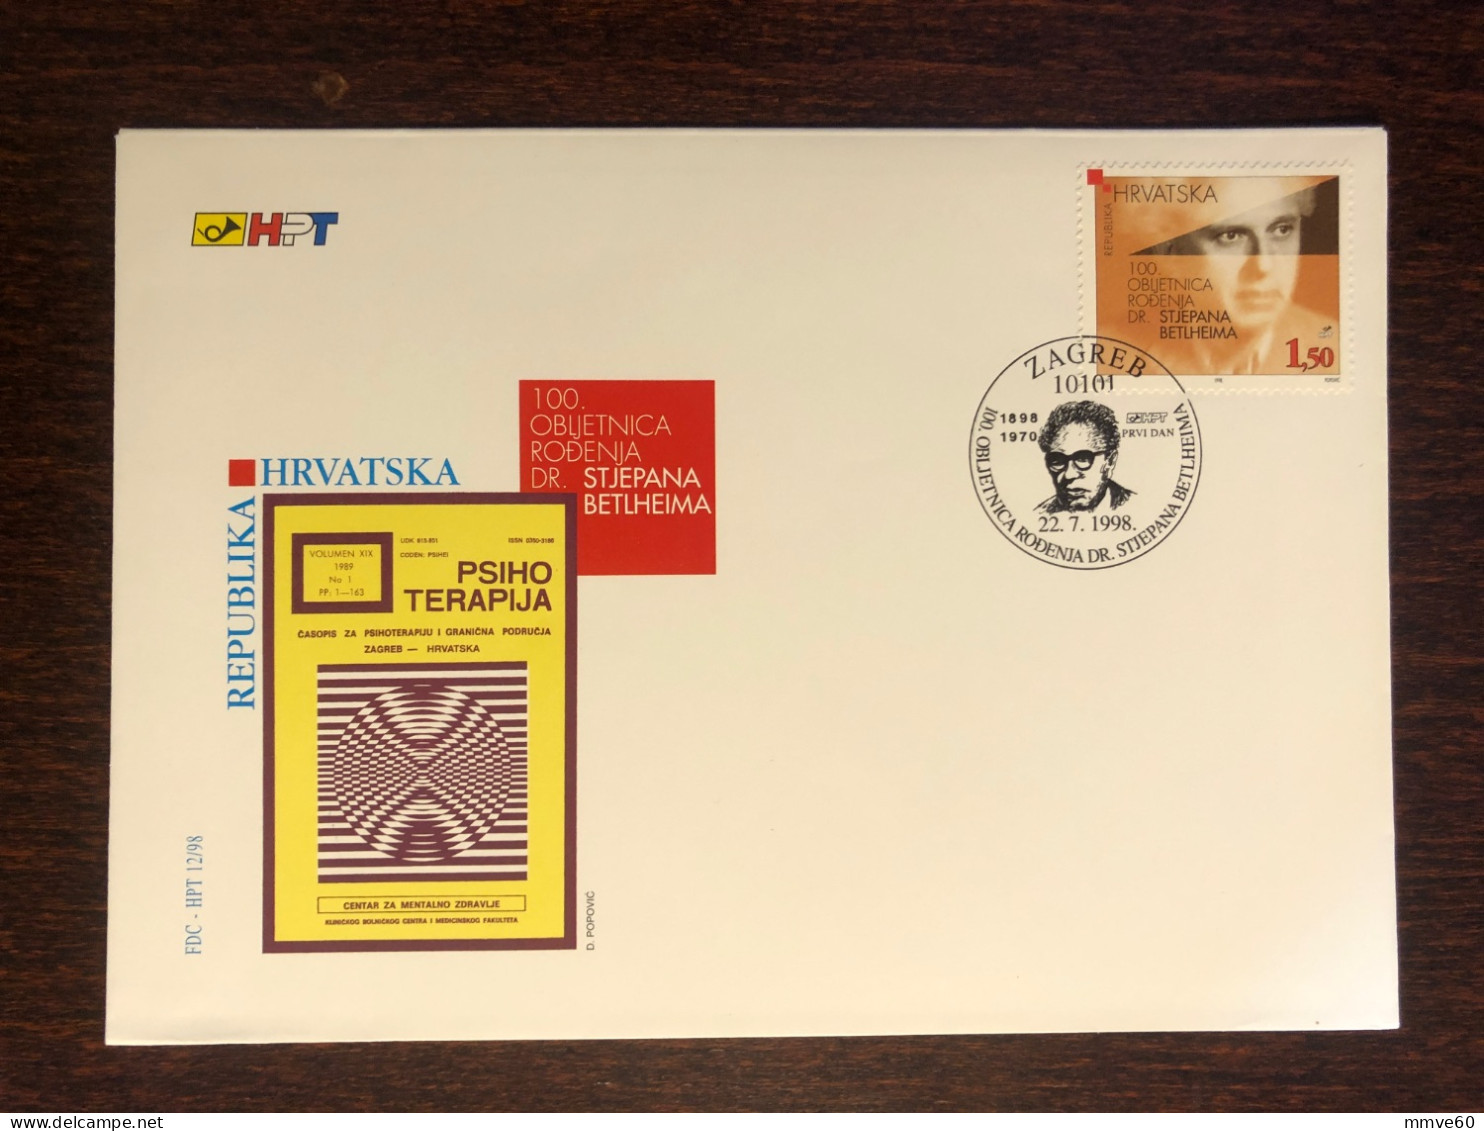 CROATIA FDC COVER 1998 YEAR PSYCHIATRY PSYCHOTHERAPY HEALTH MEDICINE STAMPS - Croatie